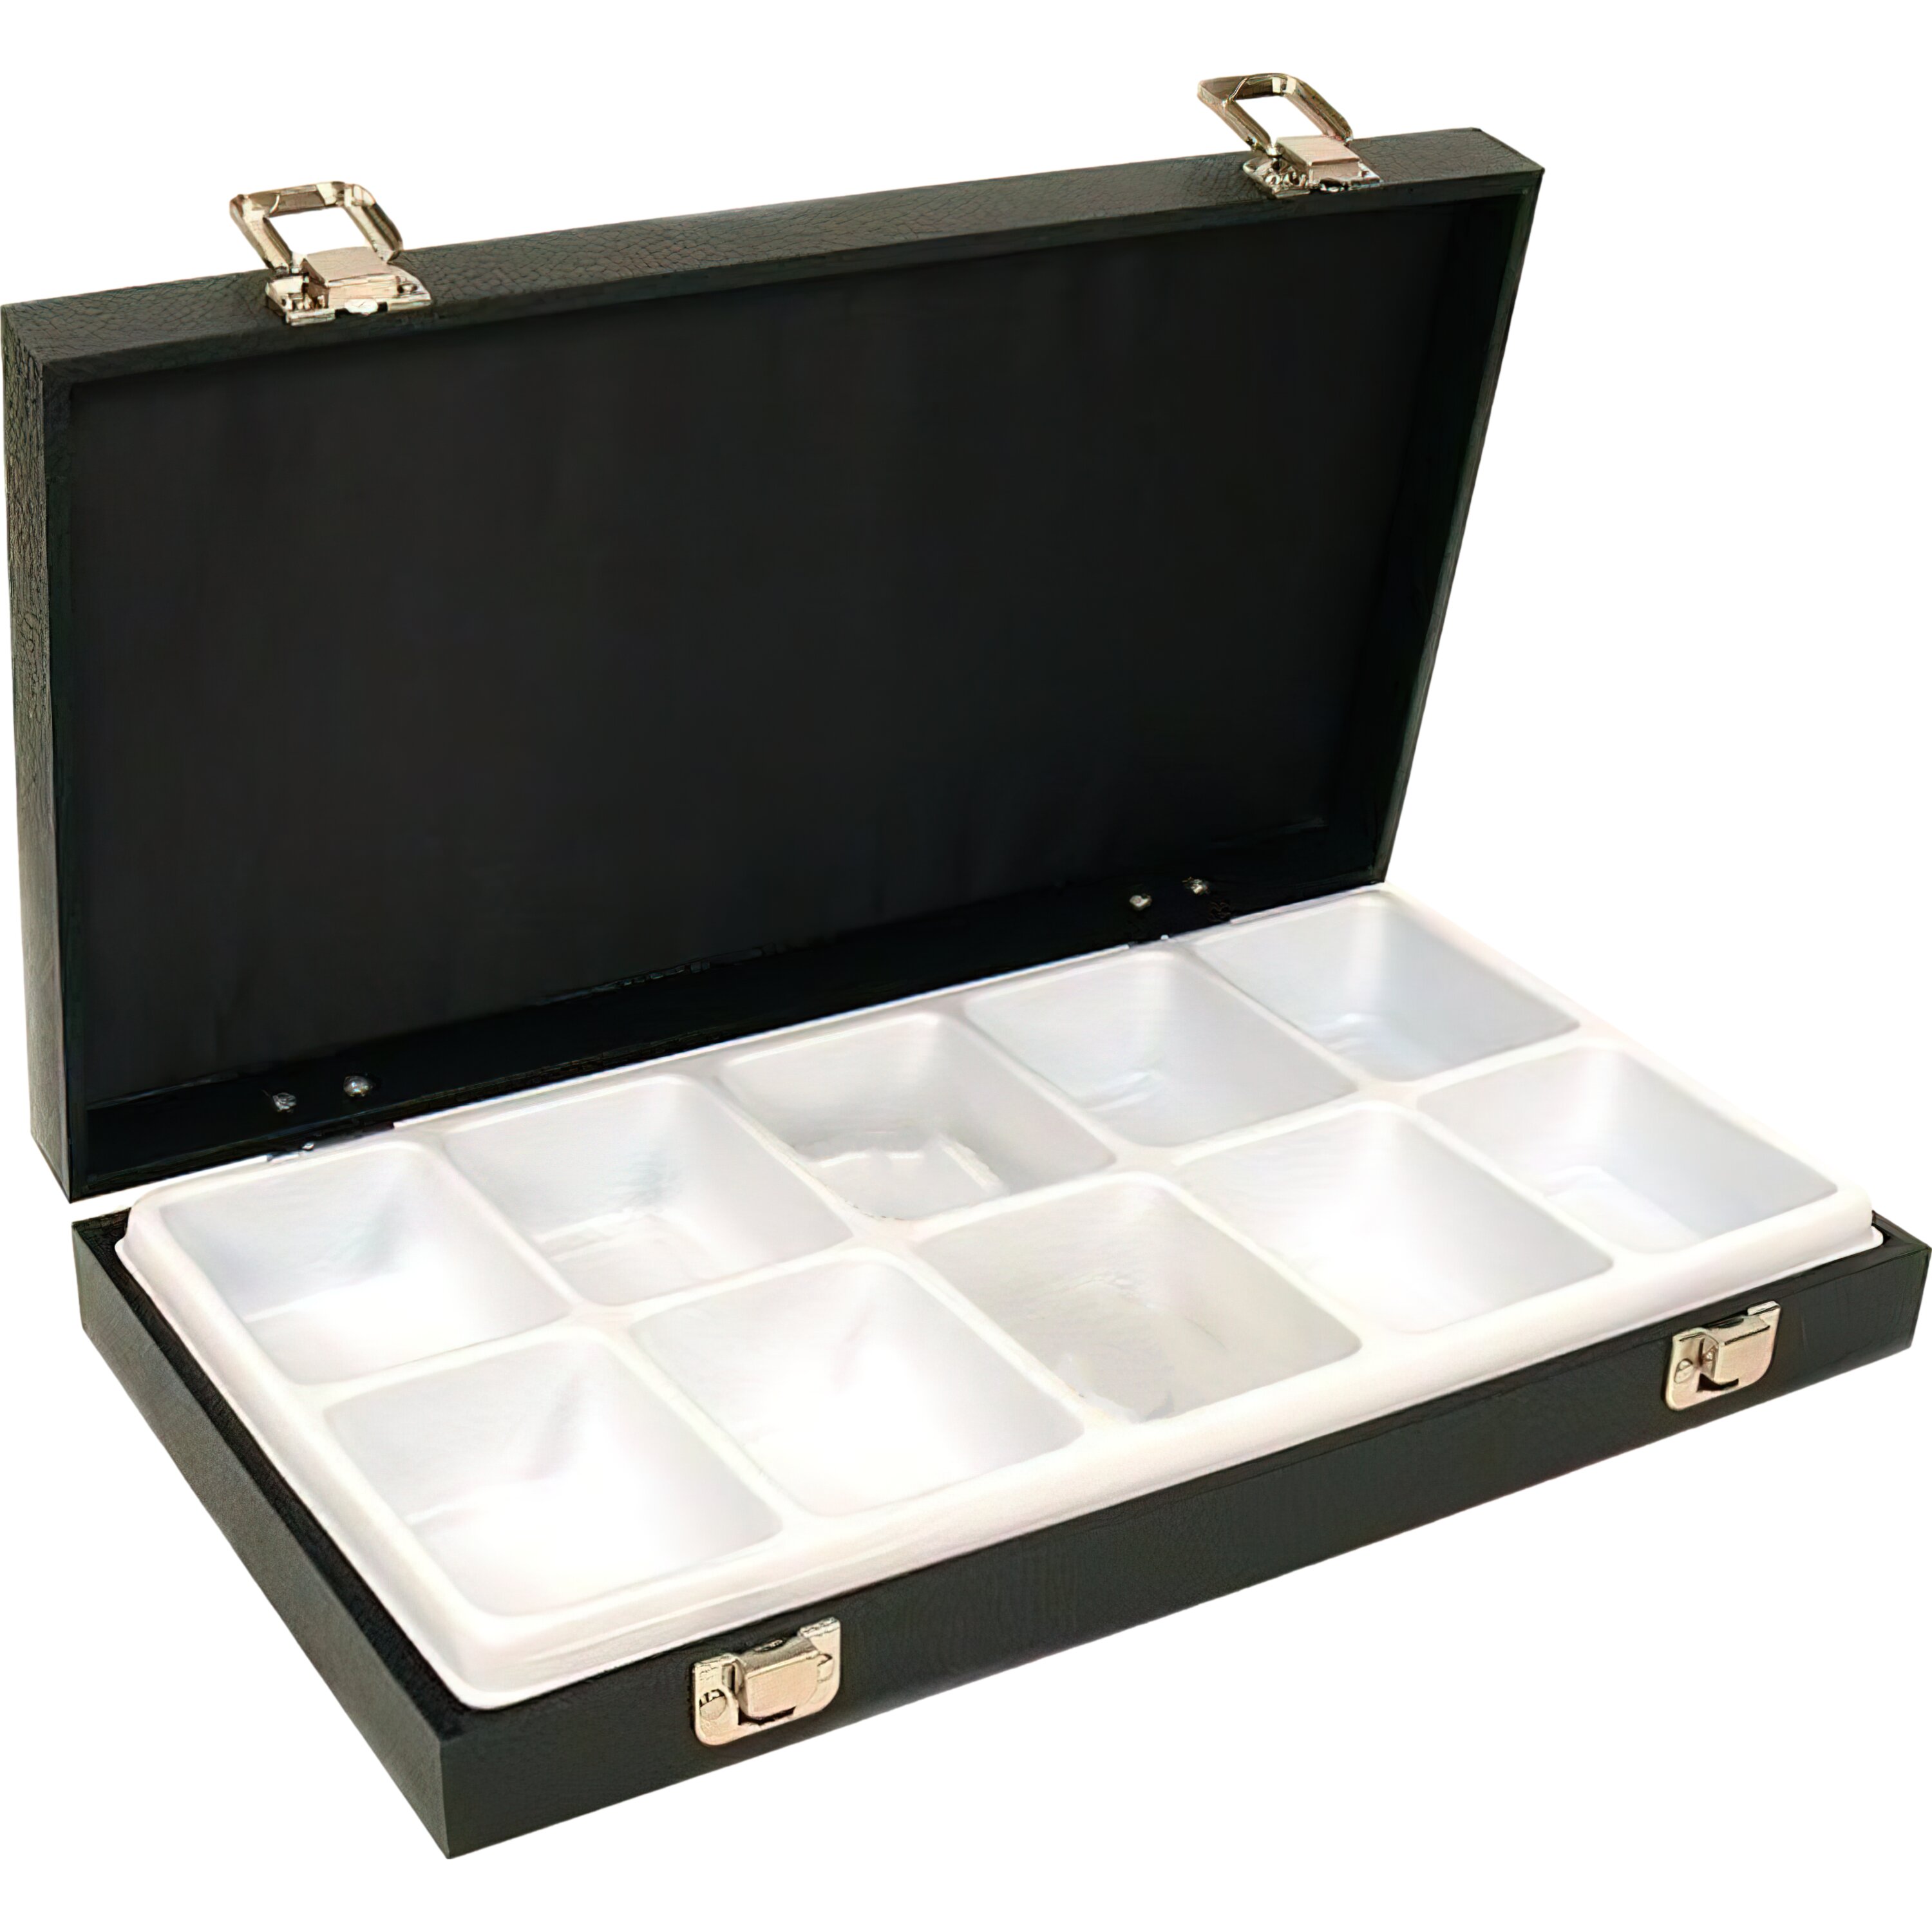 Findingking 10 Slot Pocket Watch Jewelry Tray Display & Travel Case